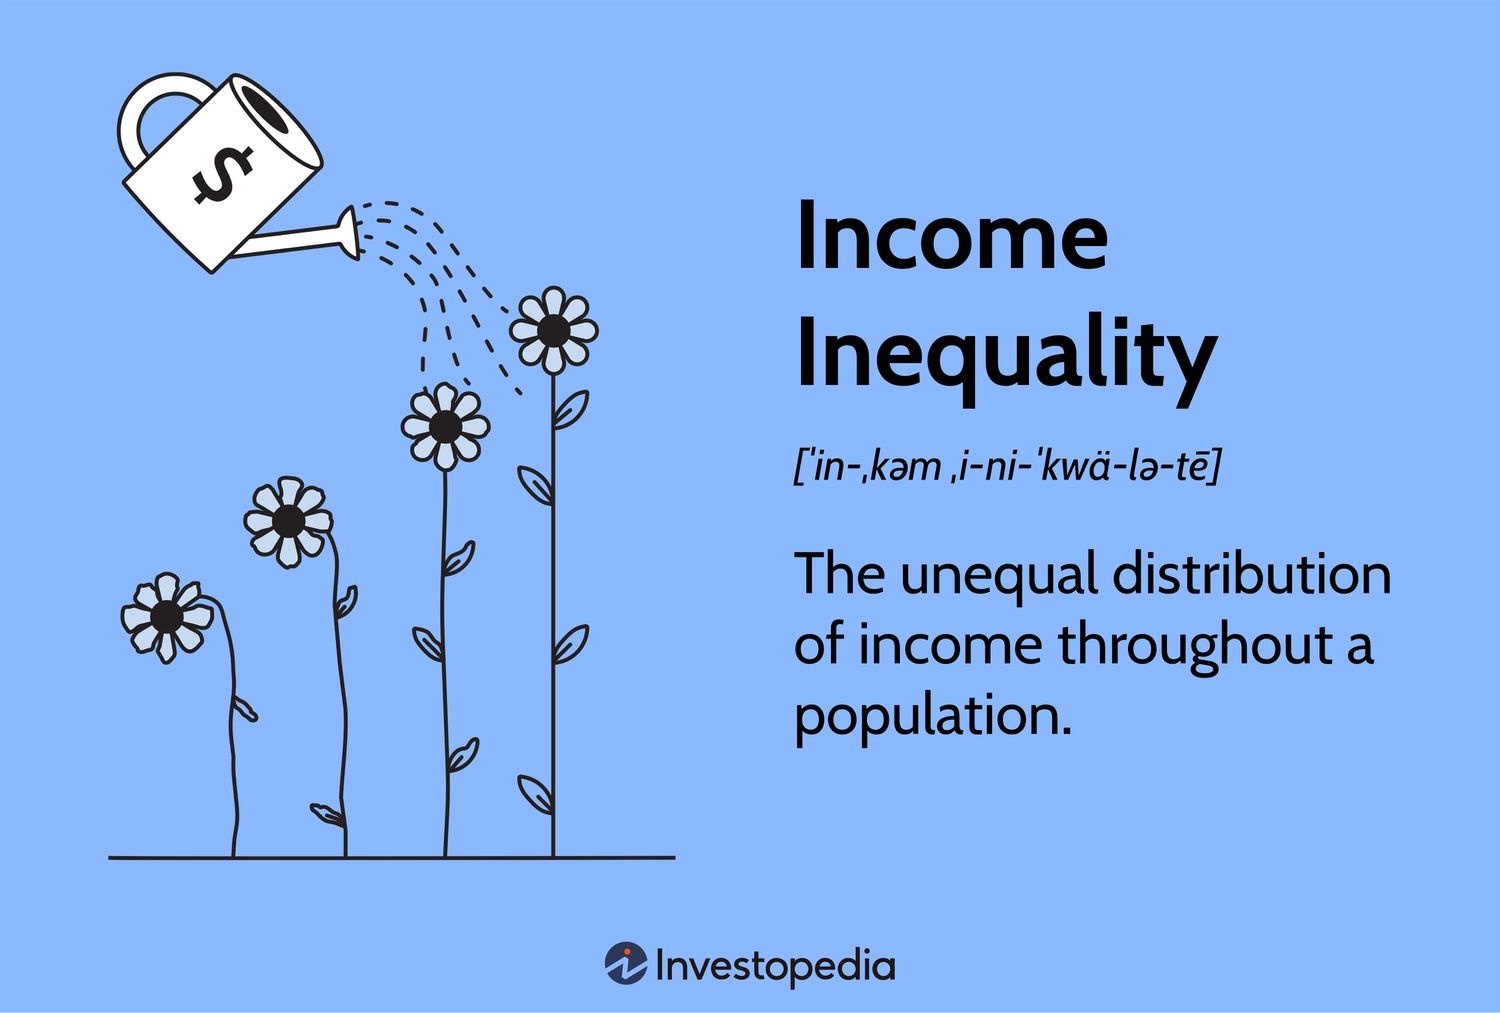 “Income Inequality: Examining the Social and Economic Impacts”